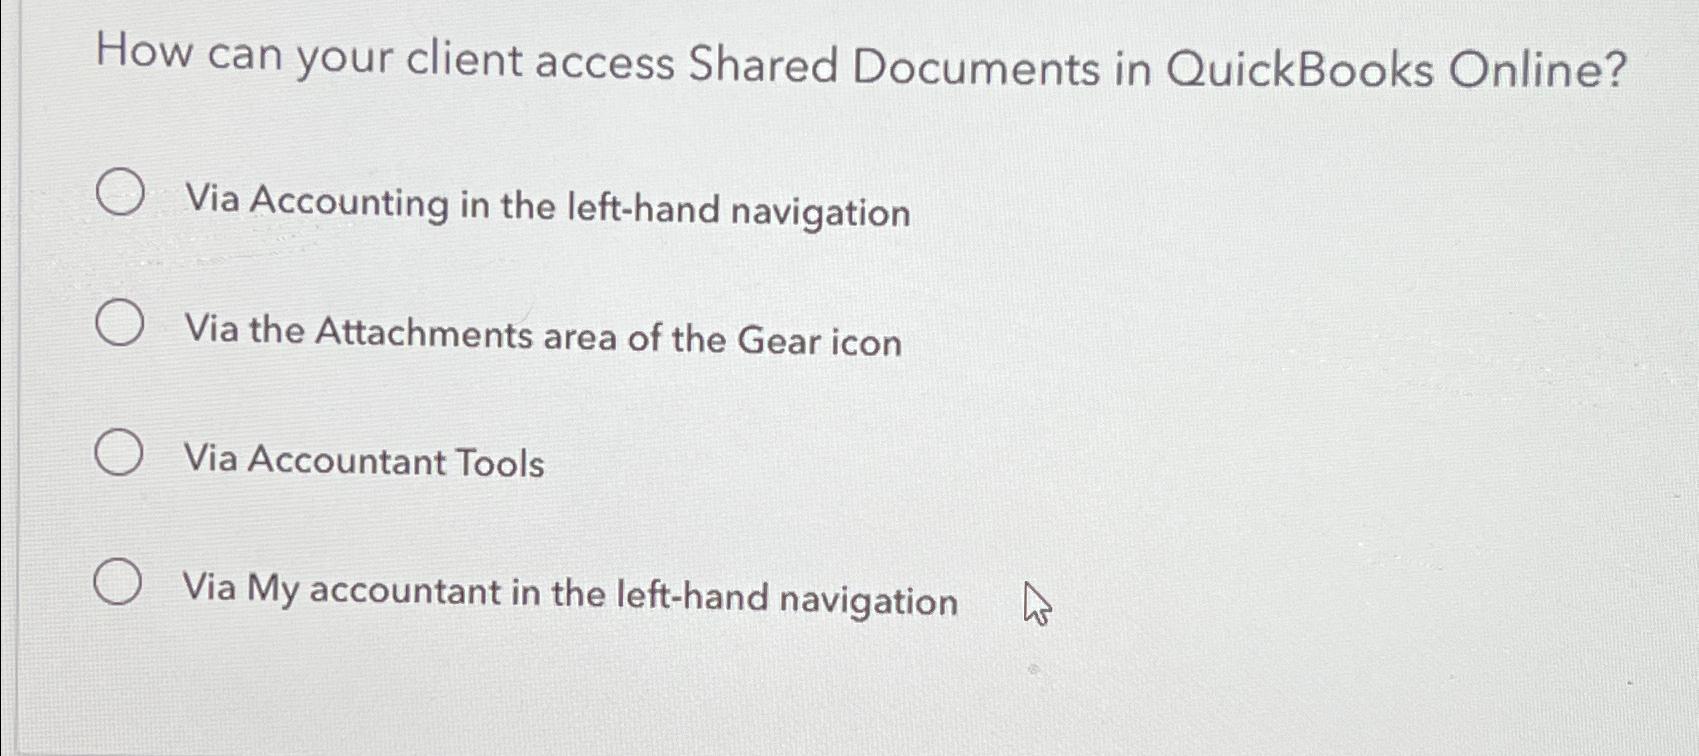 How can your client access Shared Documents in QuickBooks Online? Via Accounting in the left-hand navigation